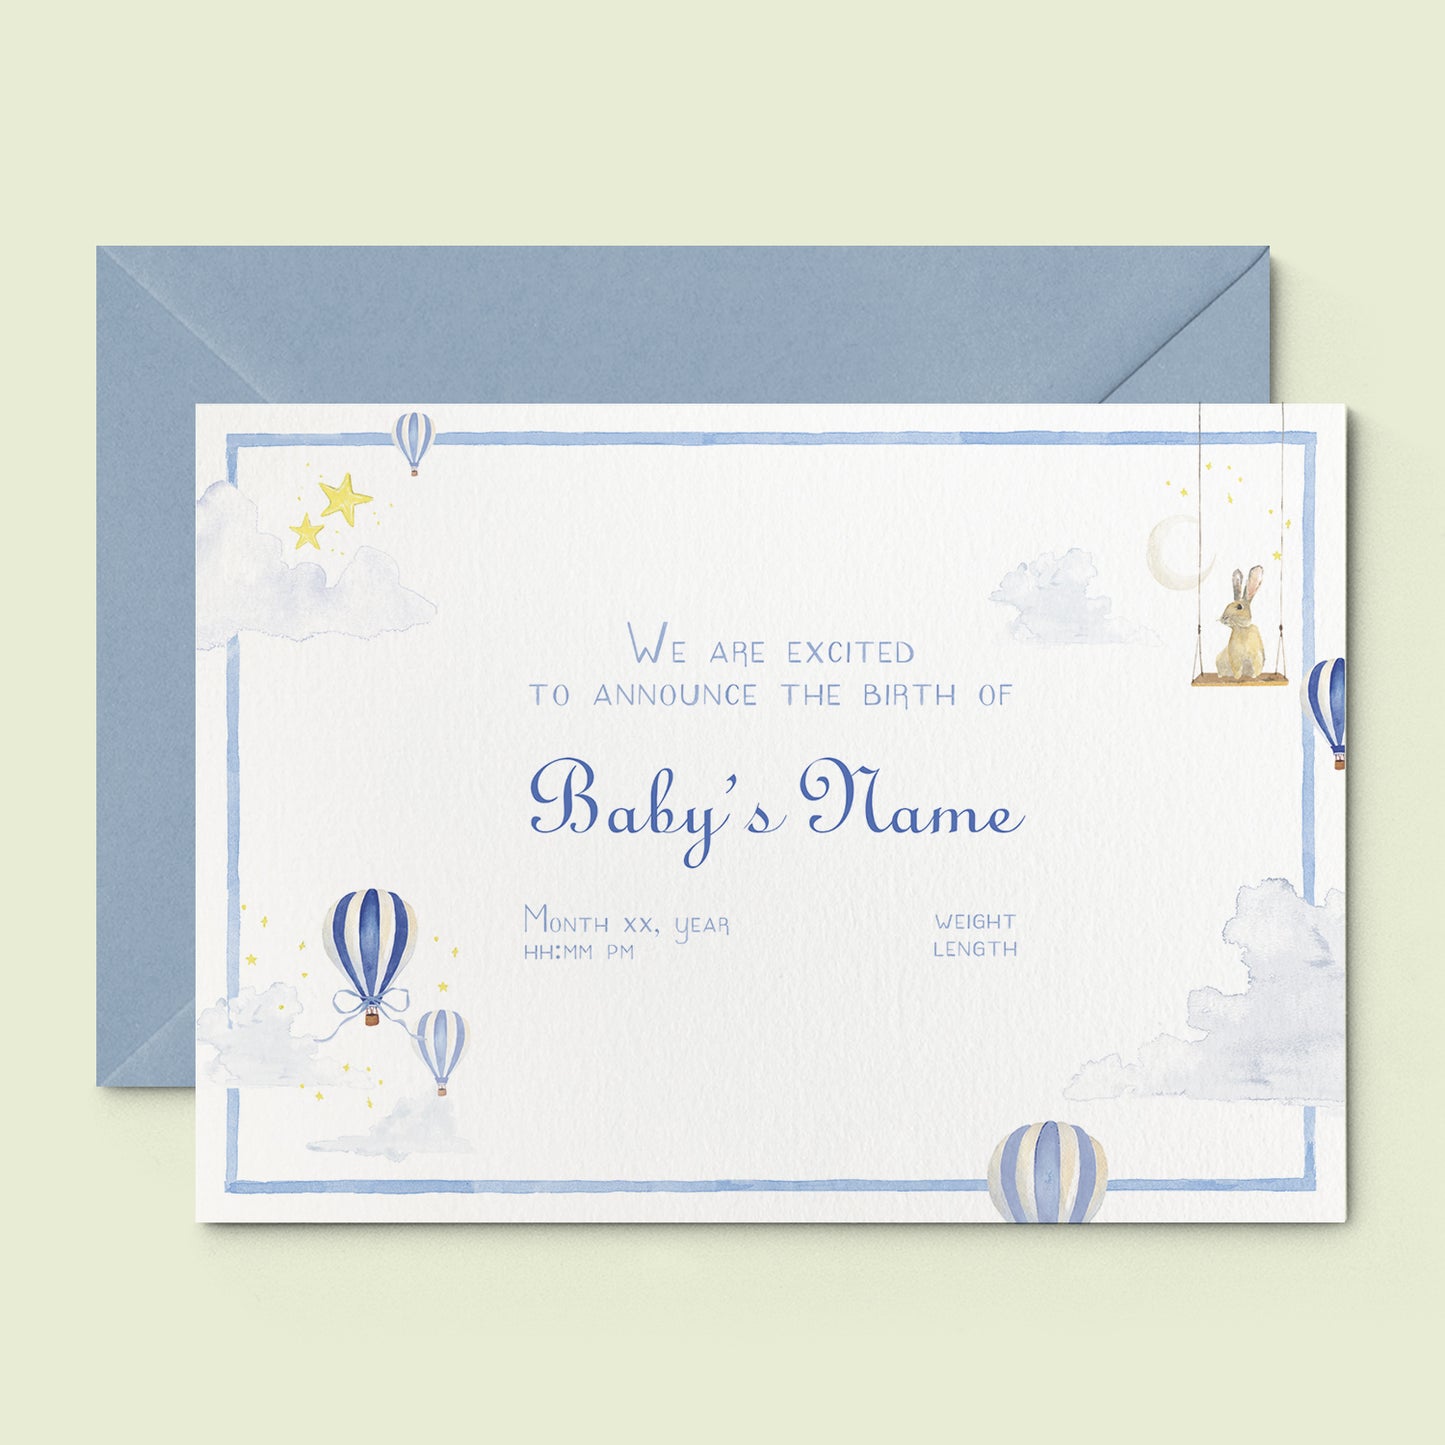 Hot Air Balloons Printed Birth Announcements - Without Photo - 06